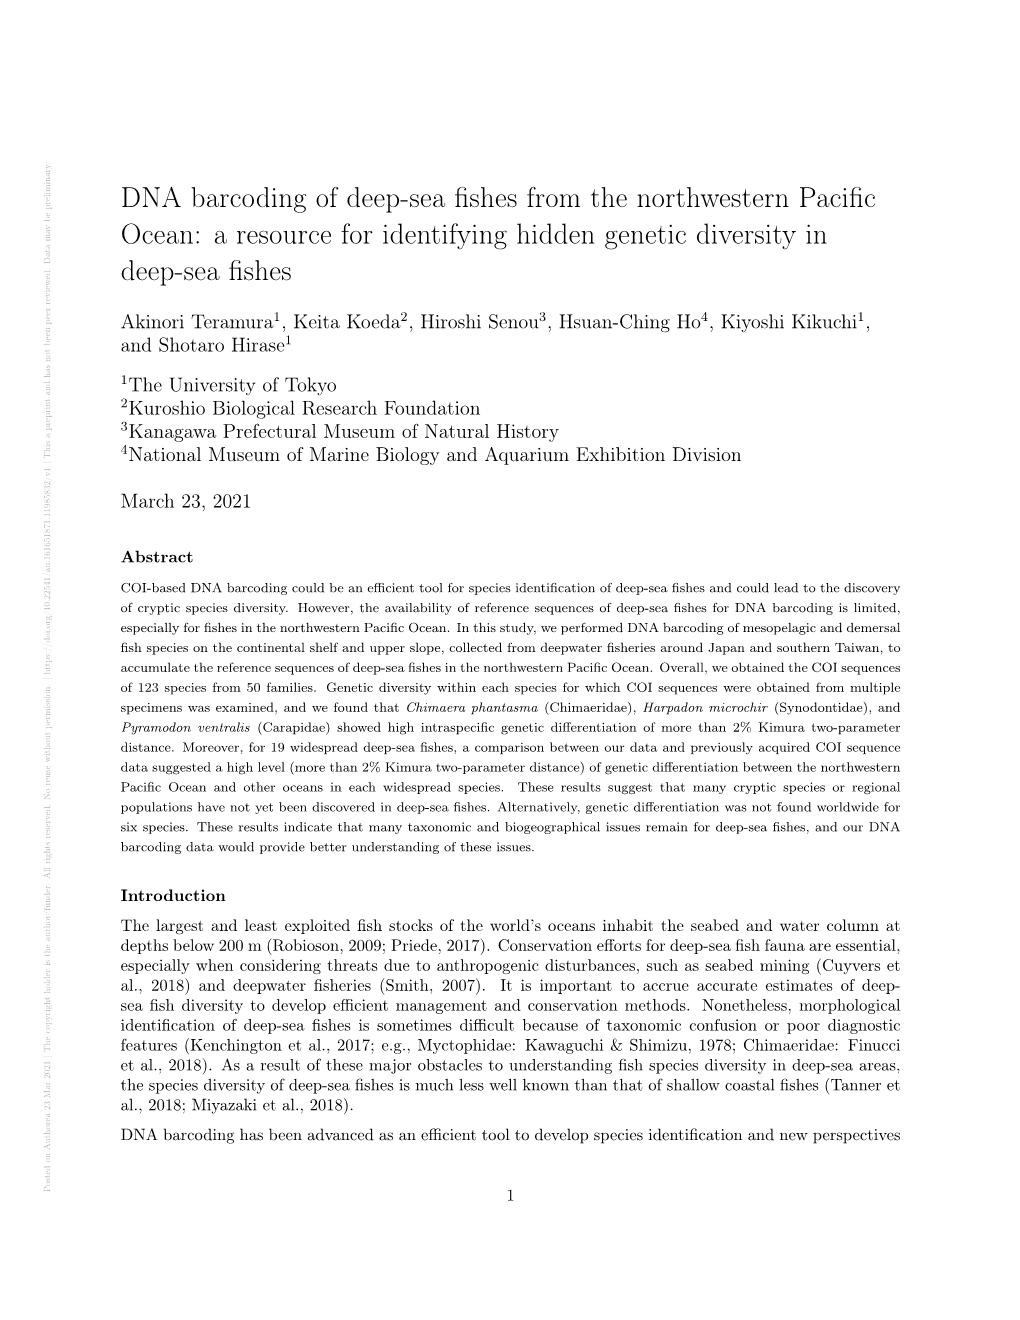 DNA Barcoding of Deep-Sea Fishes from the Northwestern Pacific Ocean